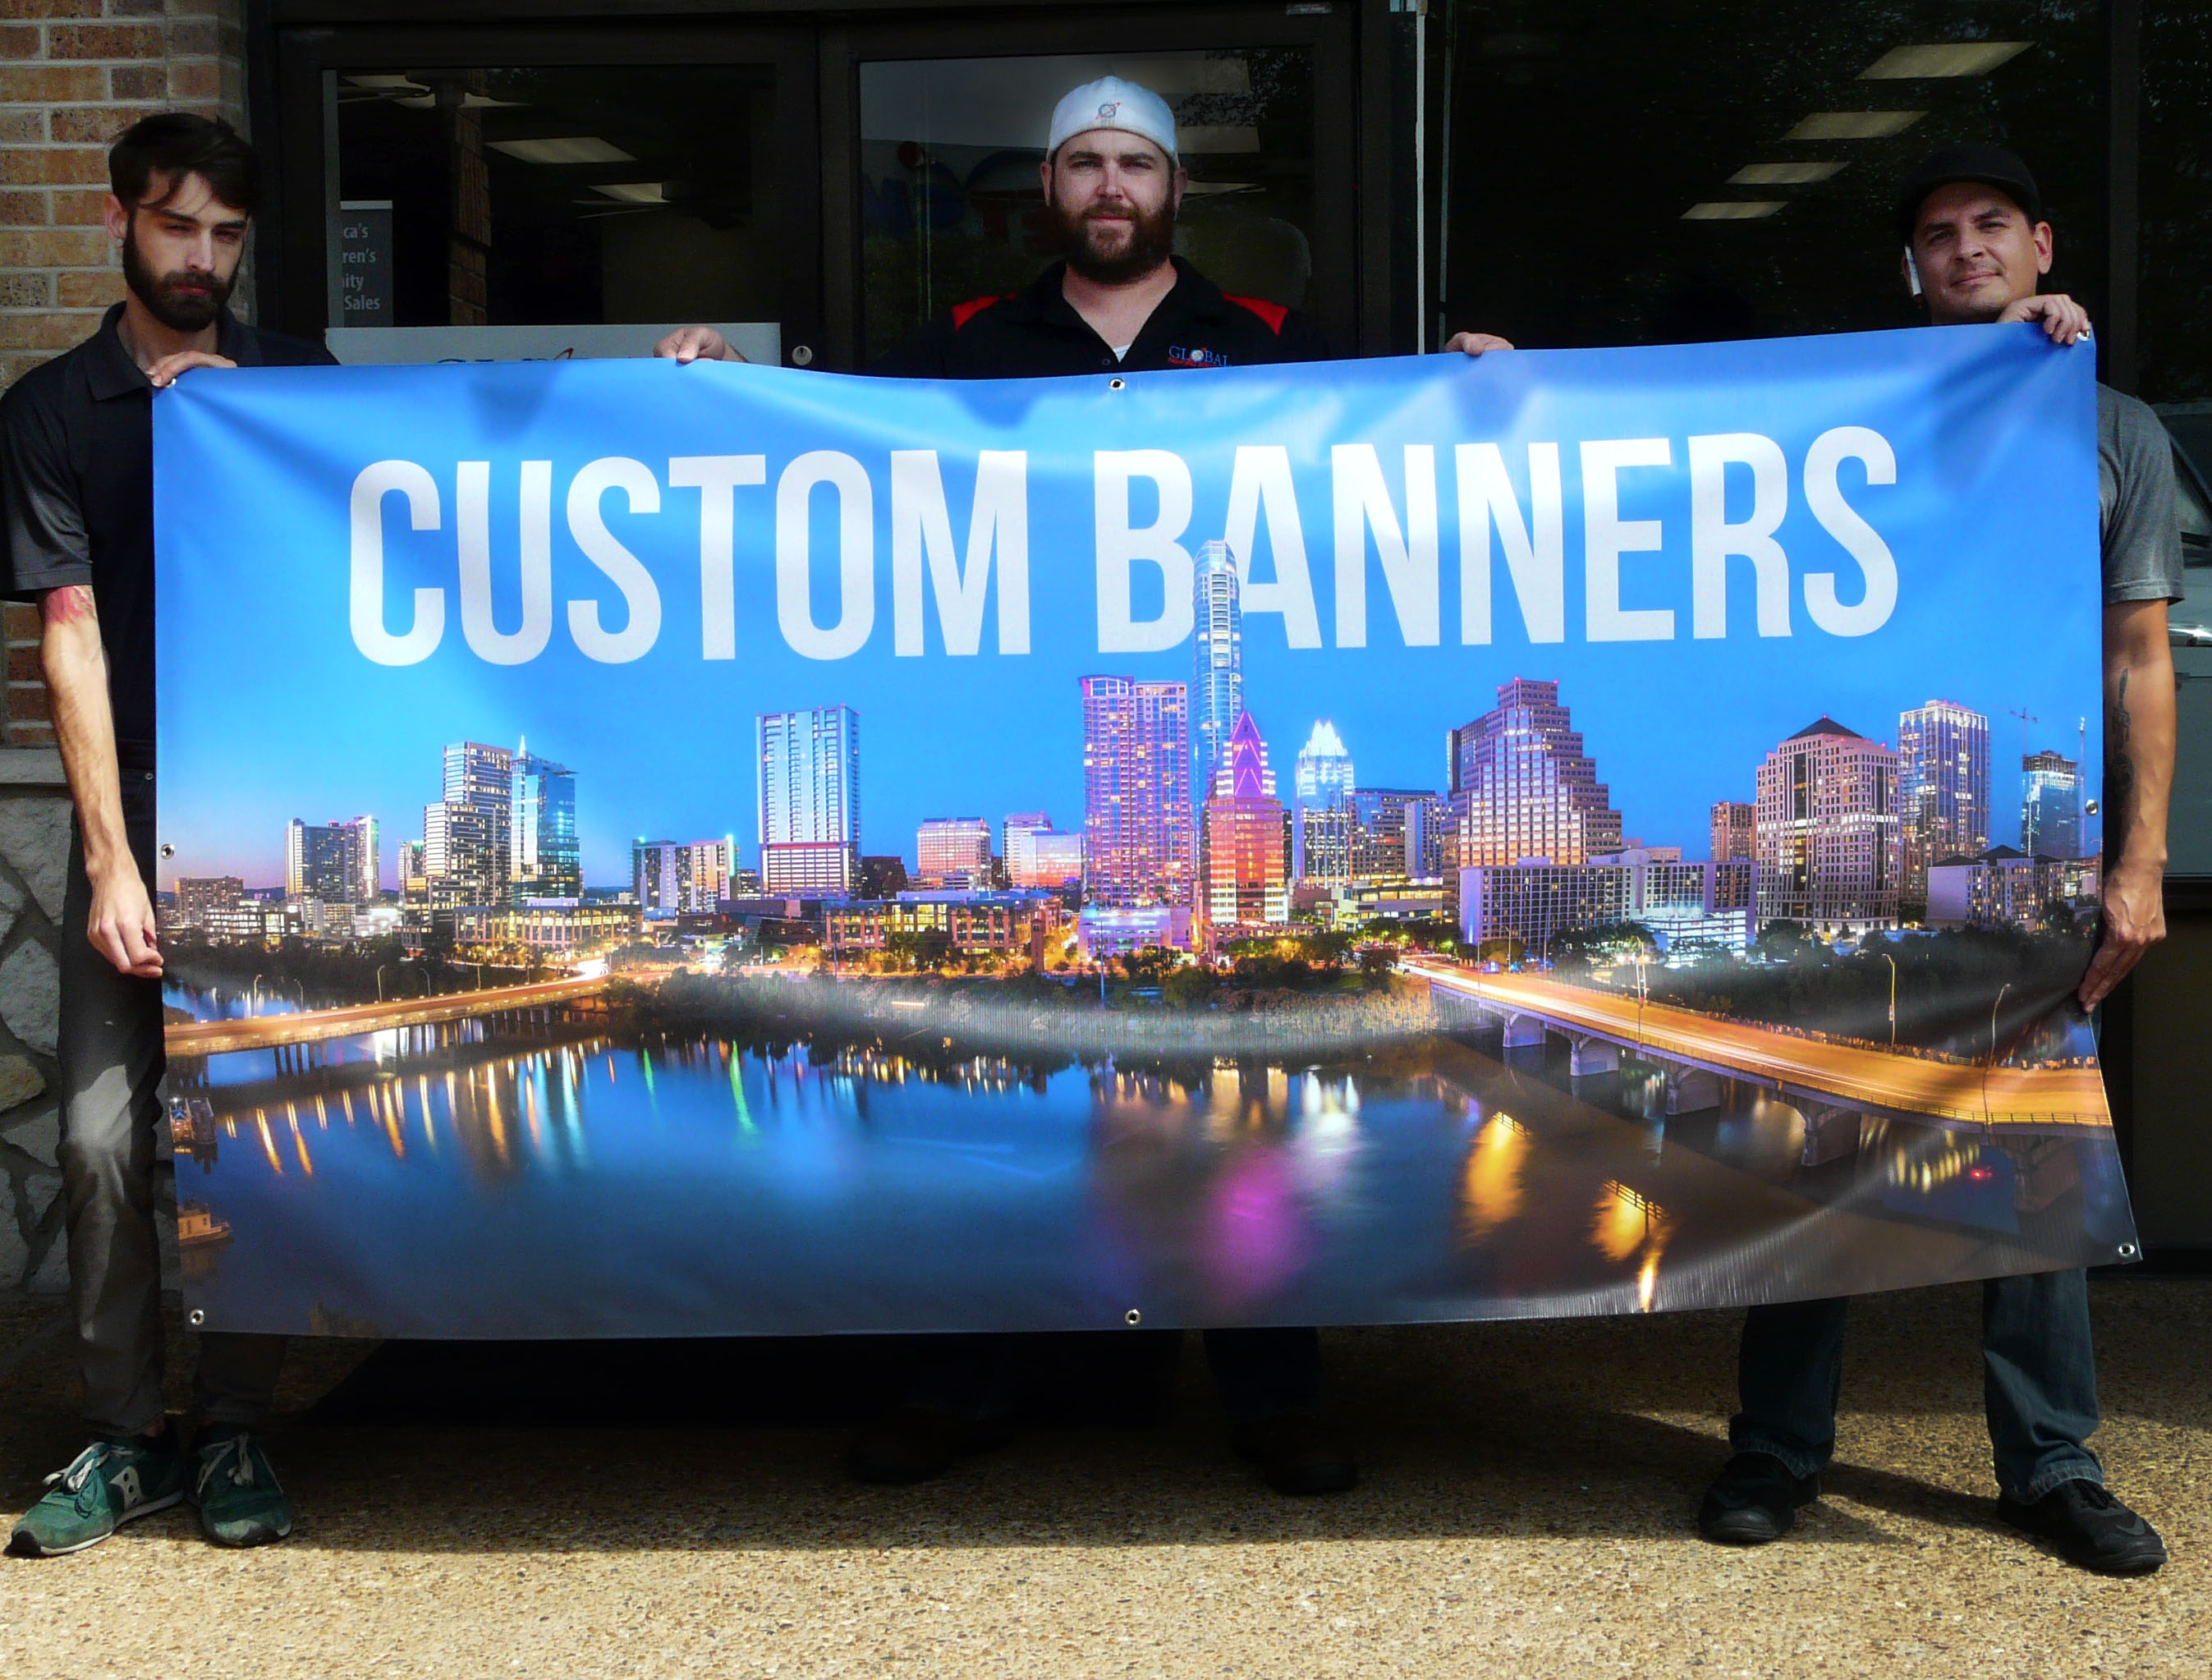 Custom Banners by Global Printing Solutions in Austin, TX